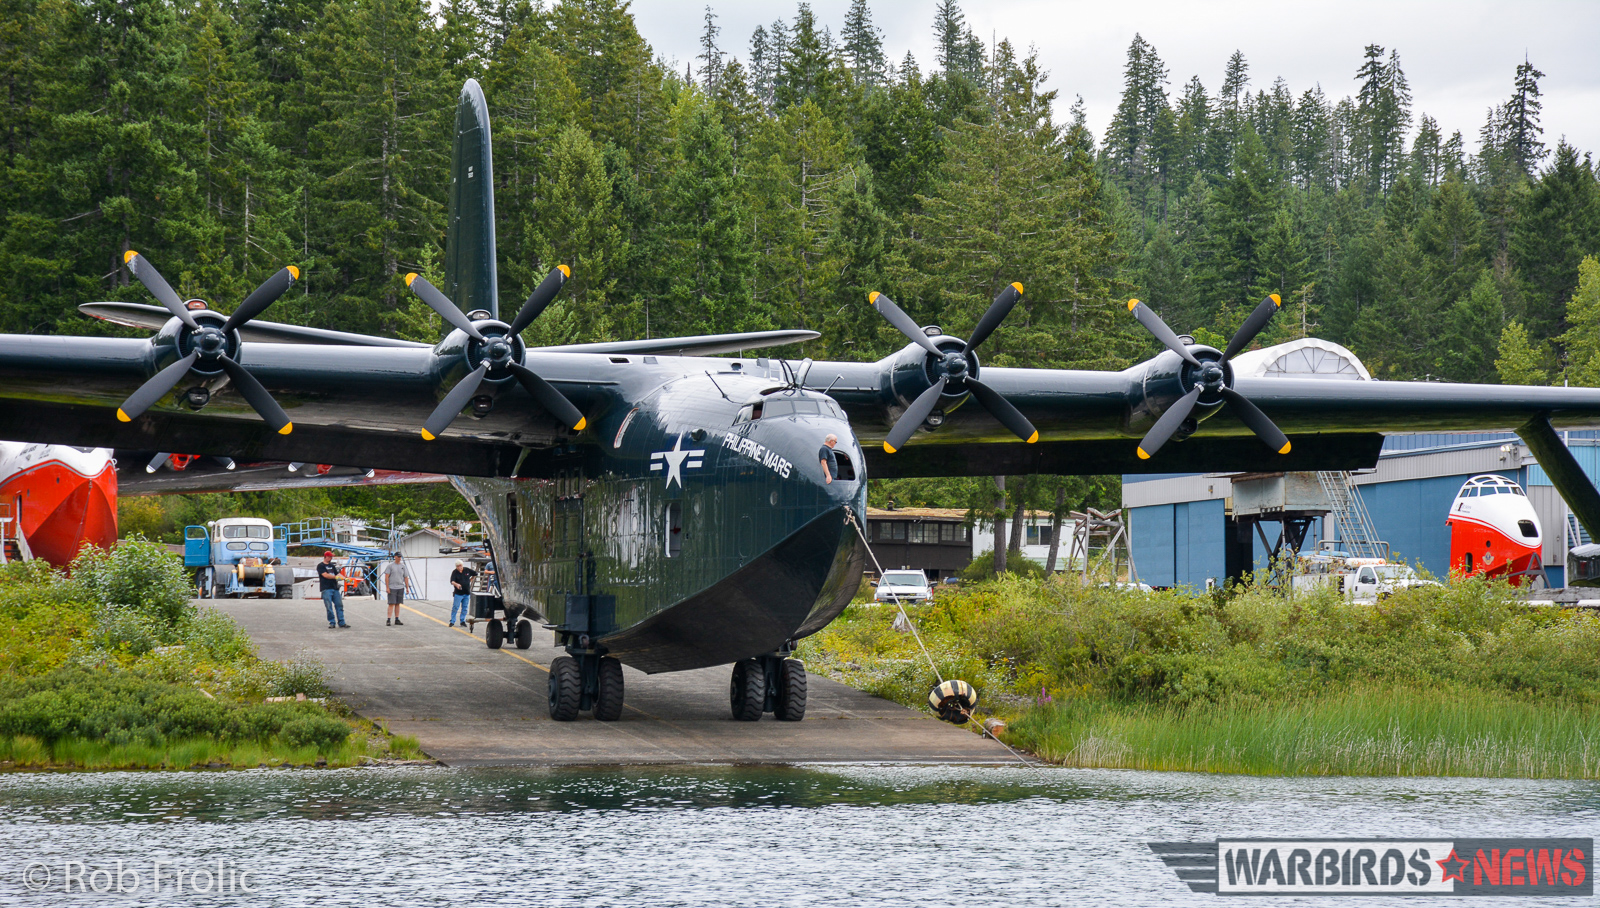 Philippine Mars rolling down the flying boat ramp at Sproat Lake. (photo by Rob Frolic)